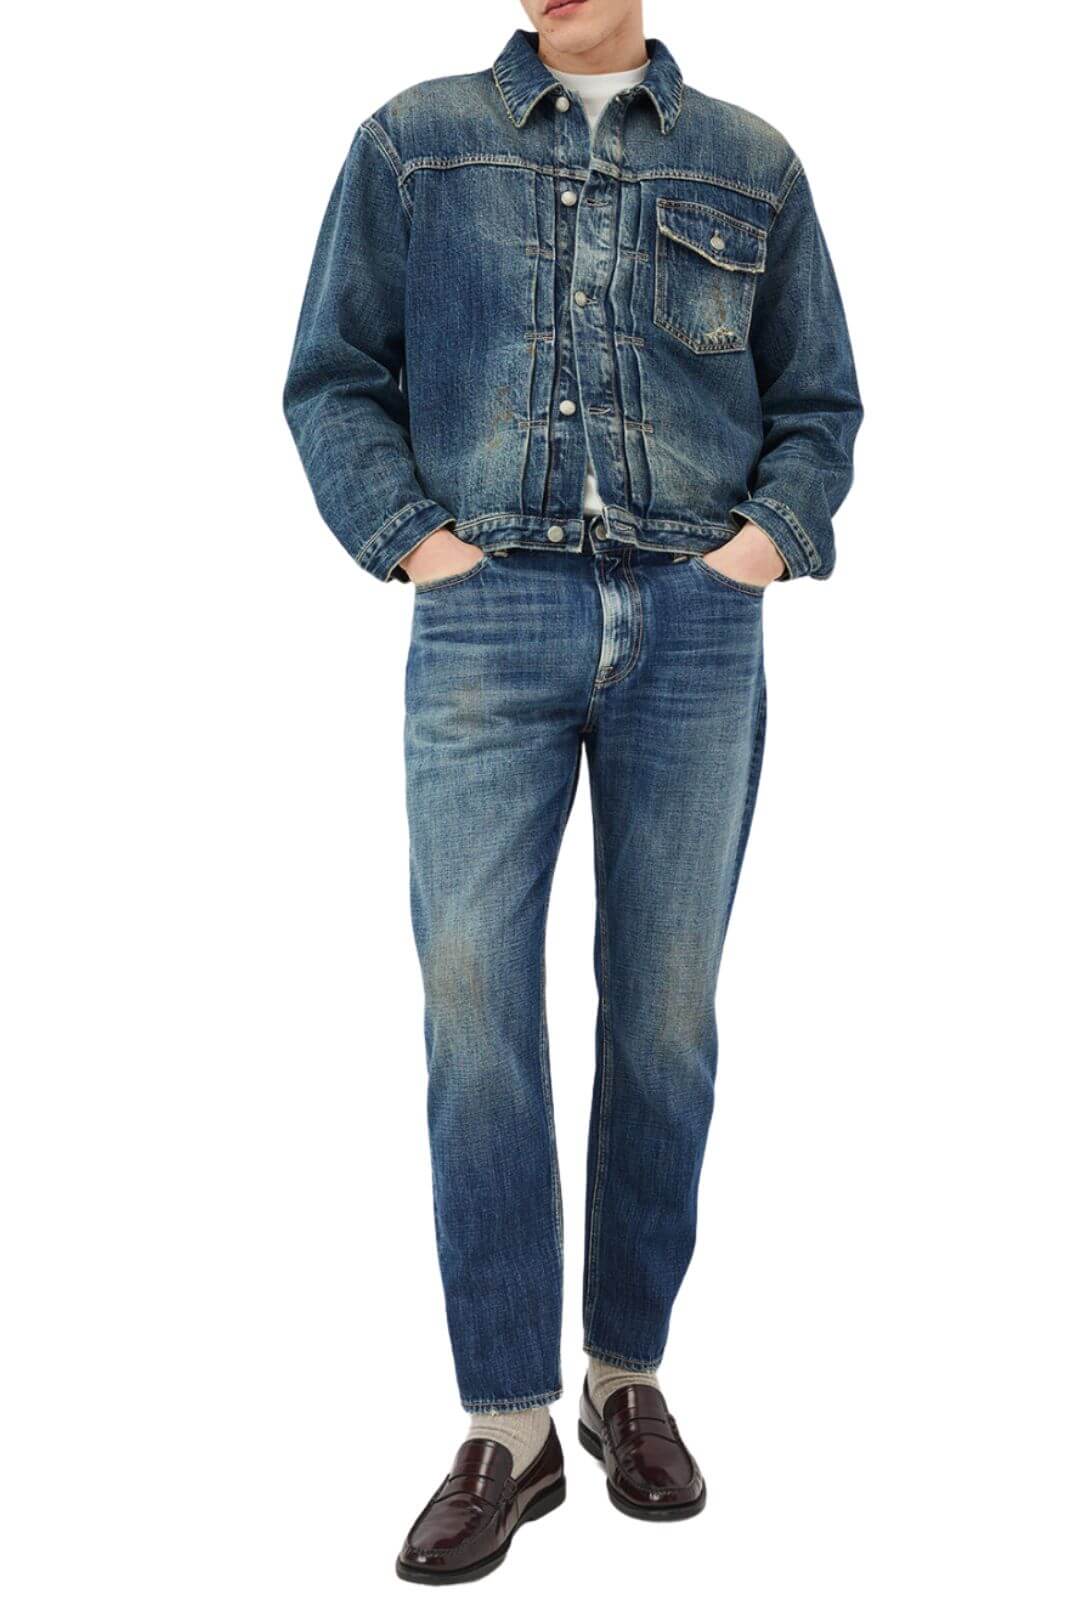 Roy Roger’s jeans uomo TIMELESS RE-SEARCH DAPPER